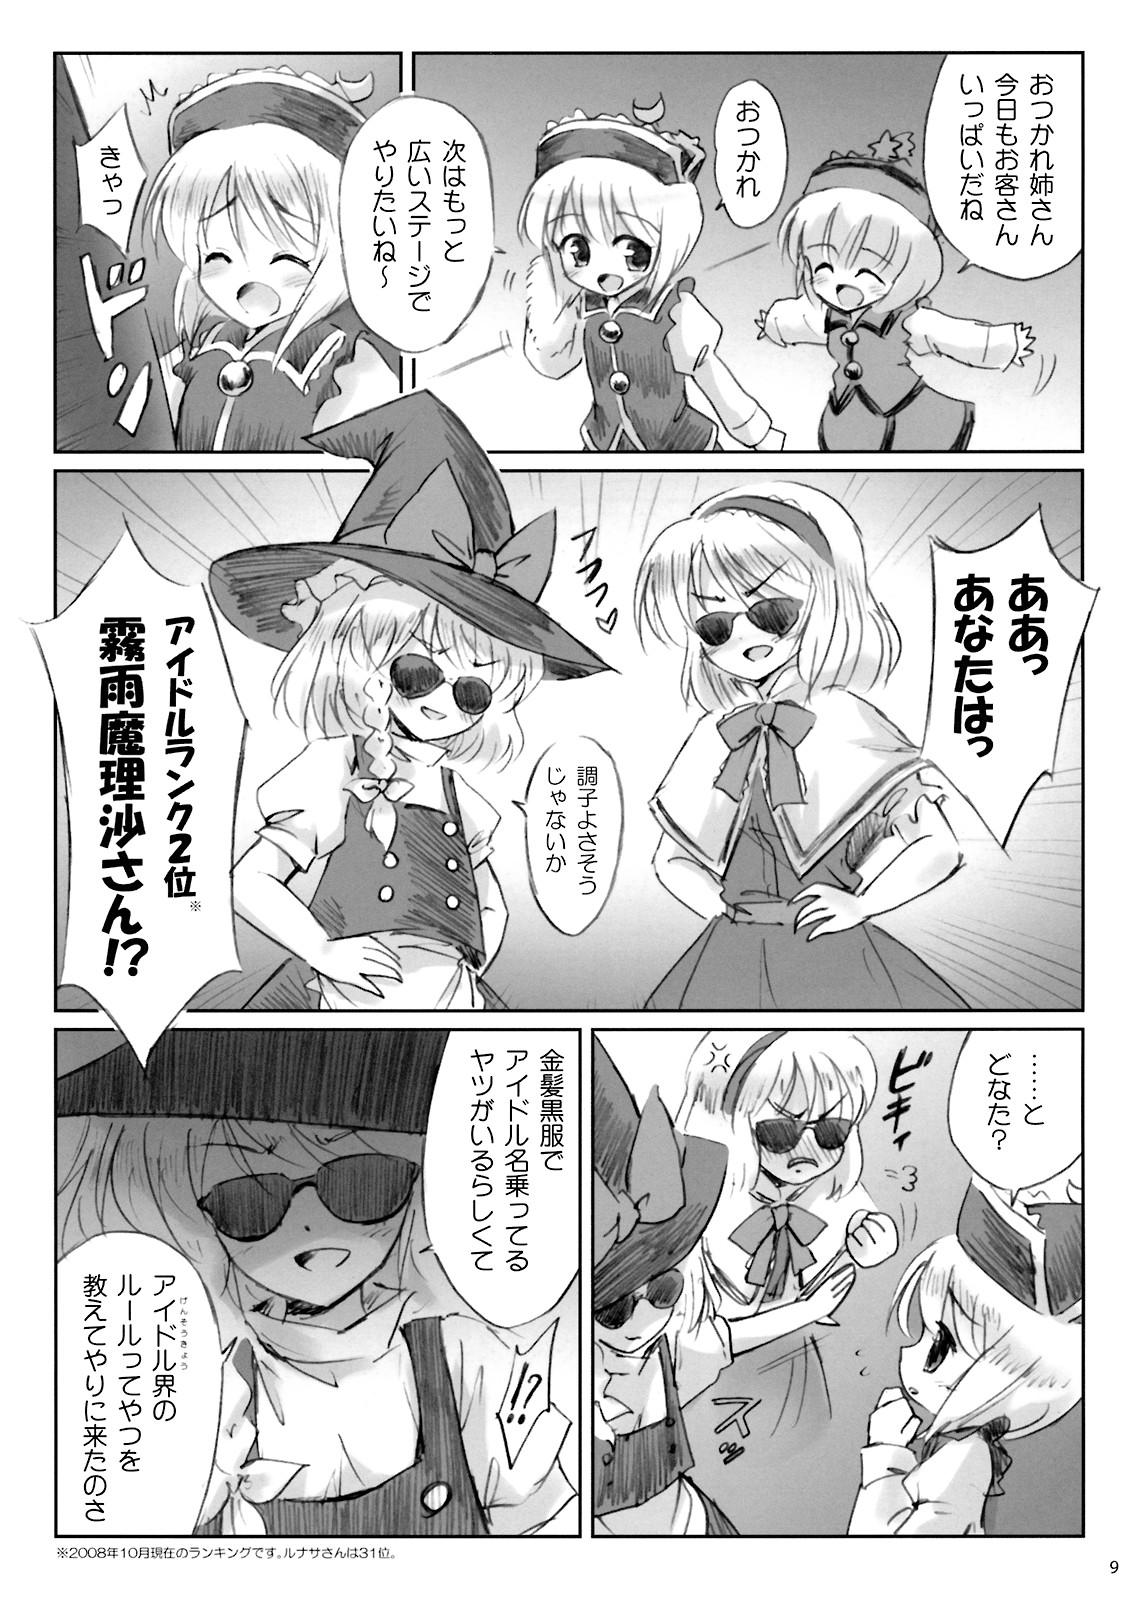 Humiliation Pov IDOLMASTER - Touhou project Cum Inside - Page 8